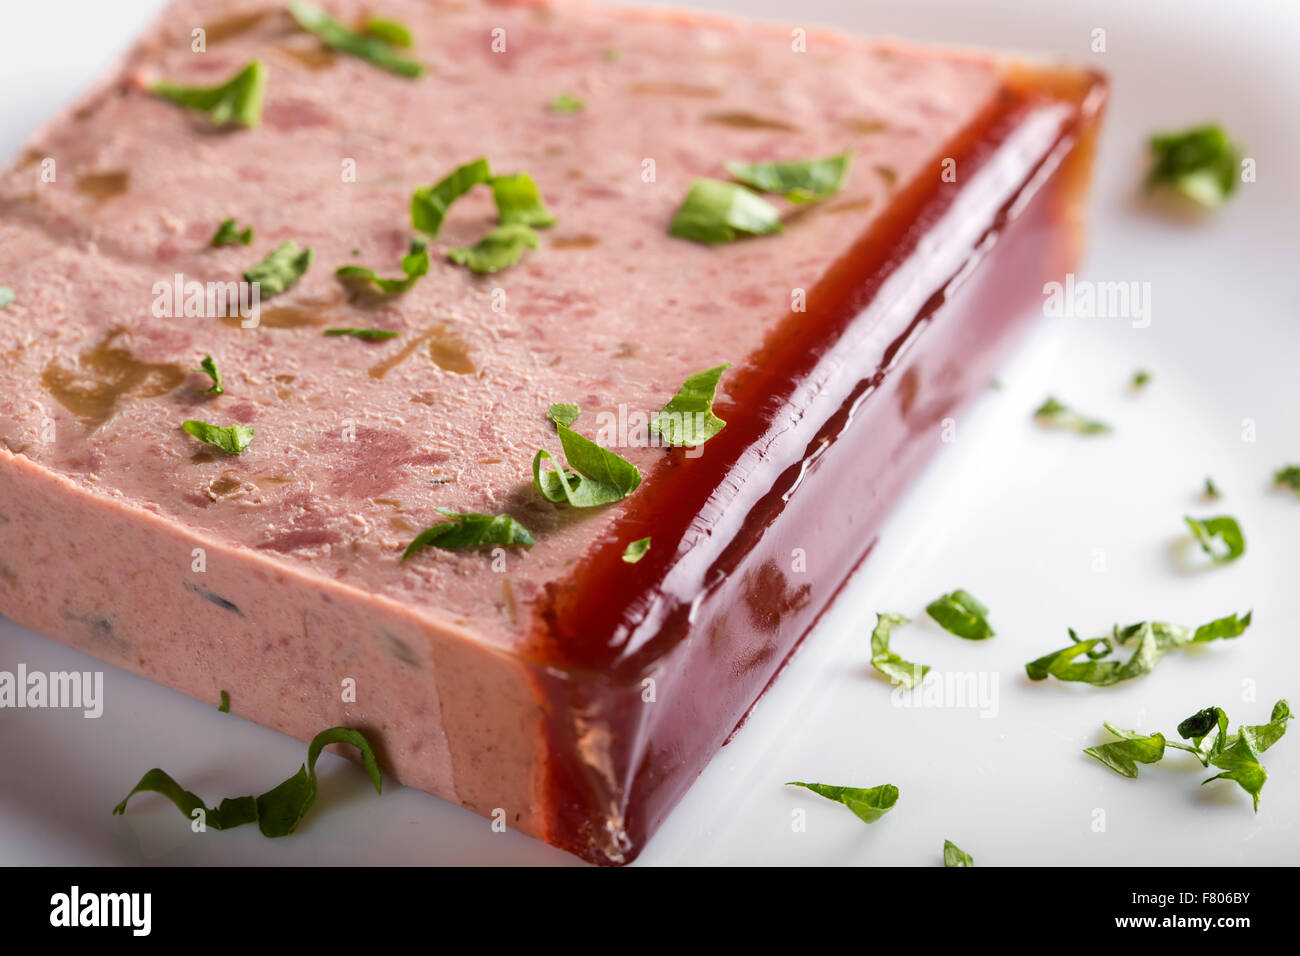 Liver Pate On Plate Made From Pork And Deer Meat Stock Photo Alamy,Freezing Plum Tomatoes